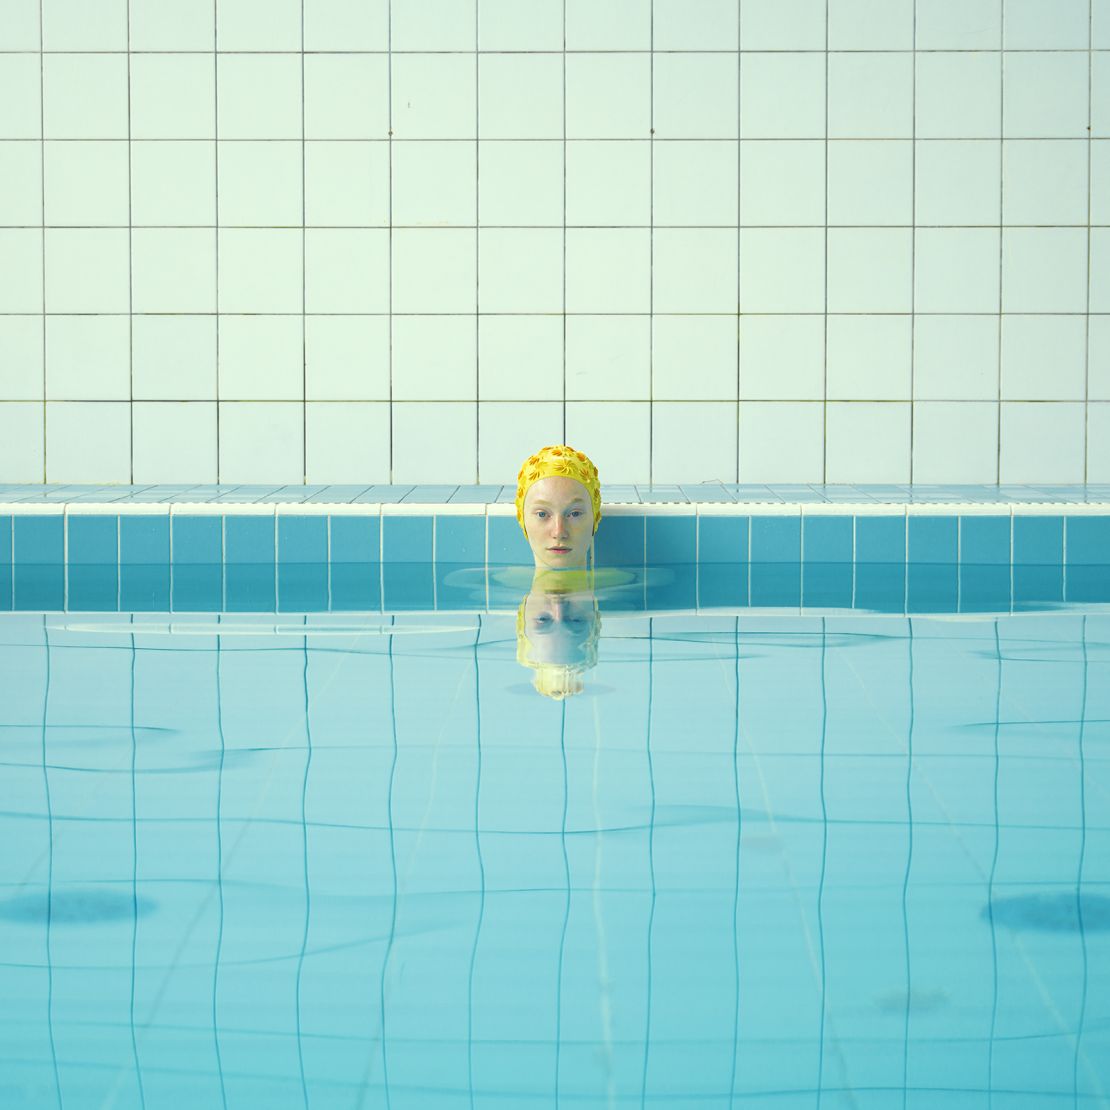 A shot from Maria Švarbová photography series, "Swimming Pools."